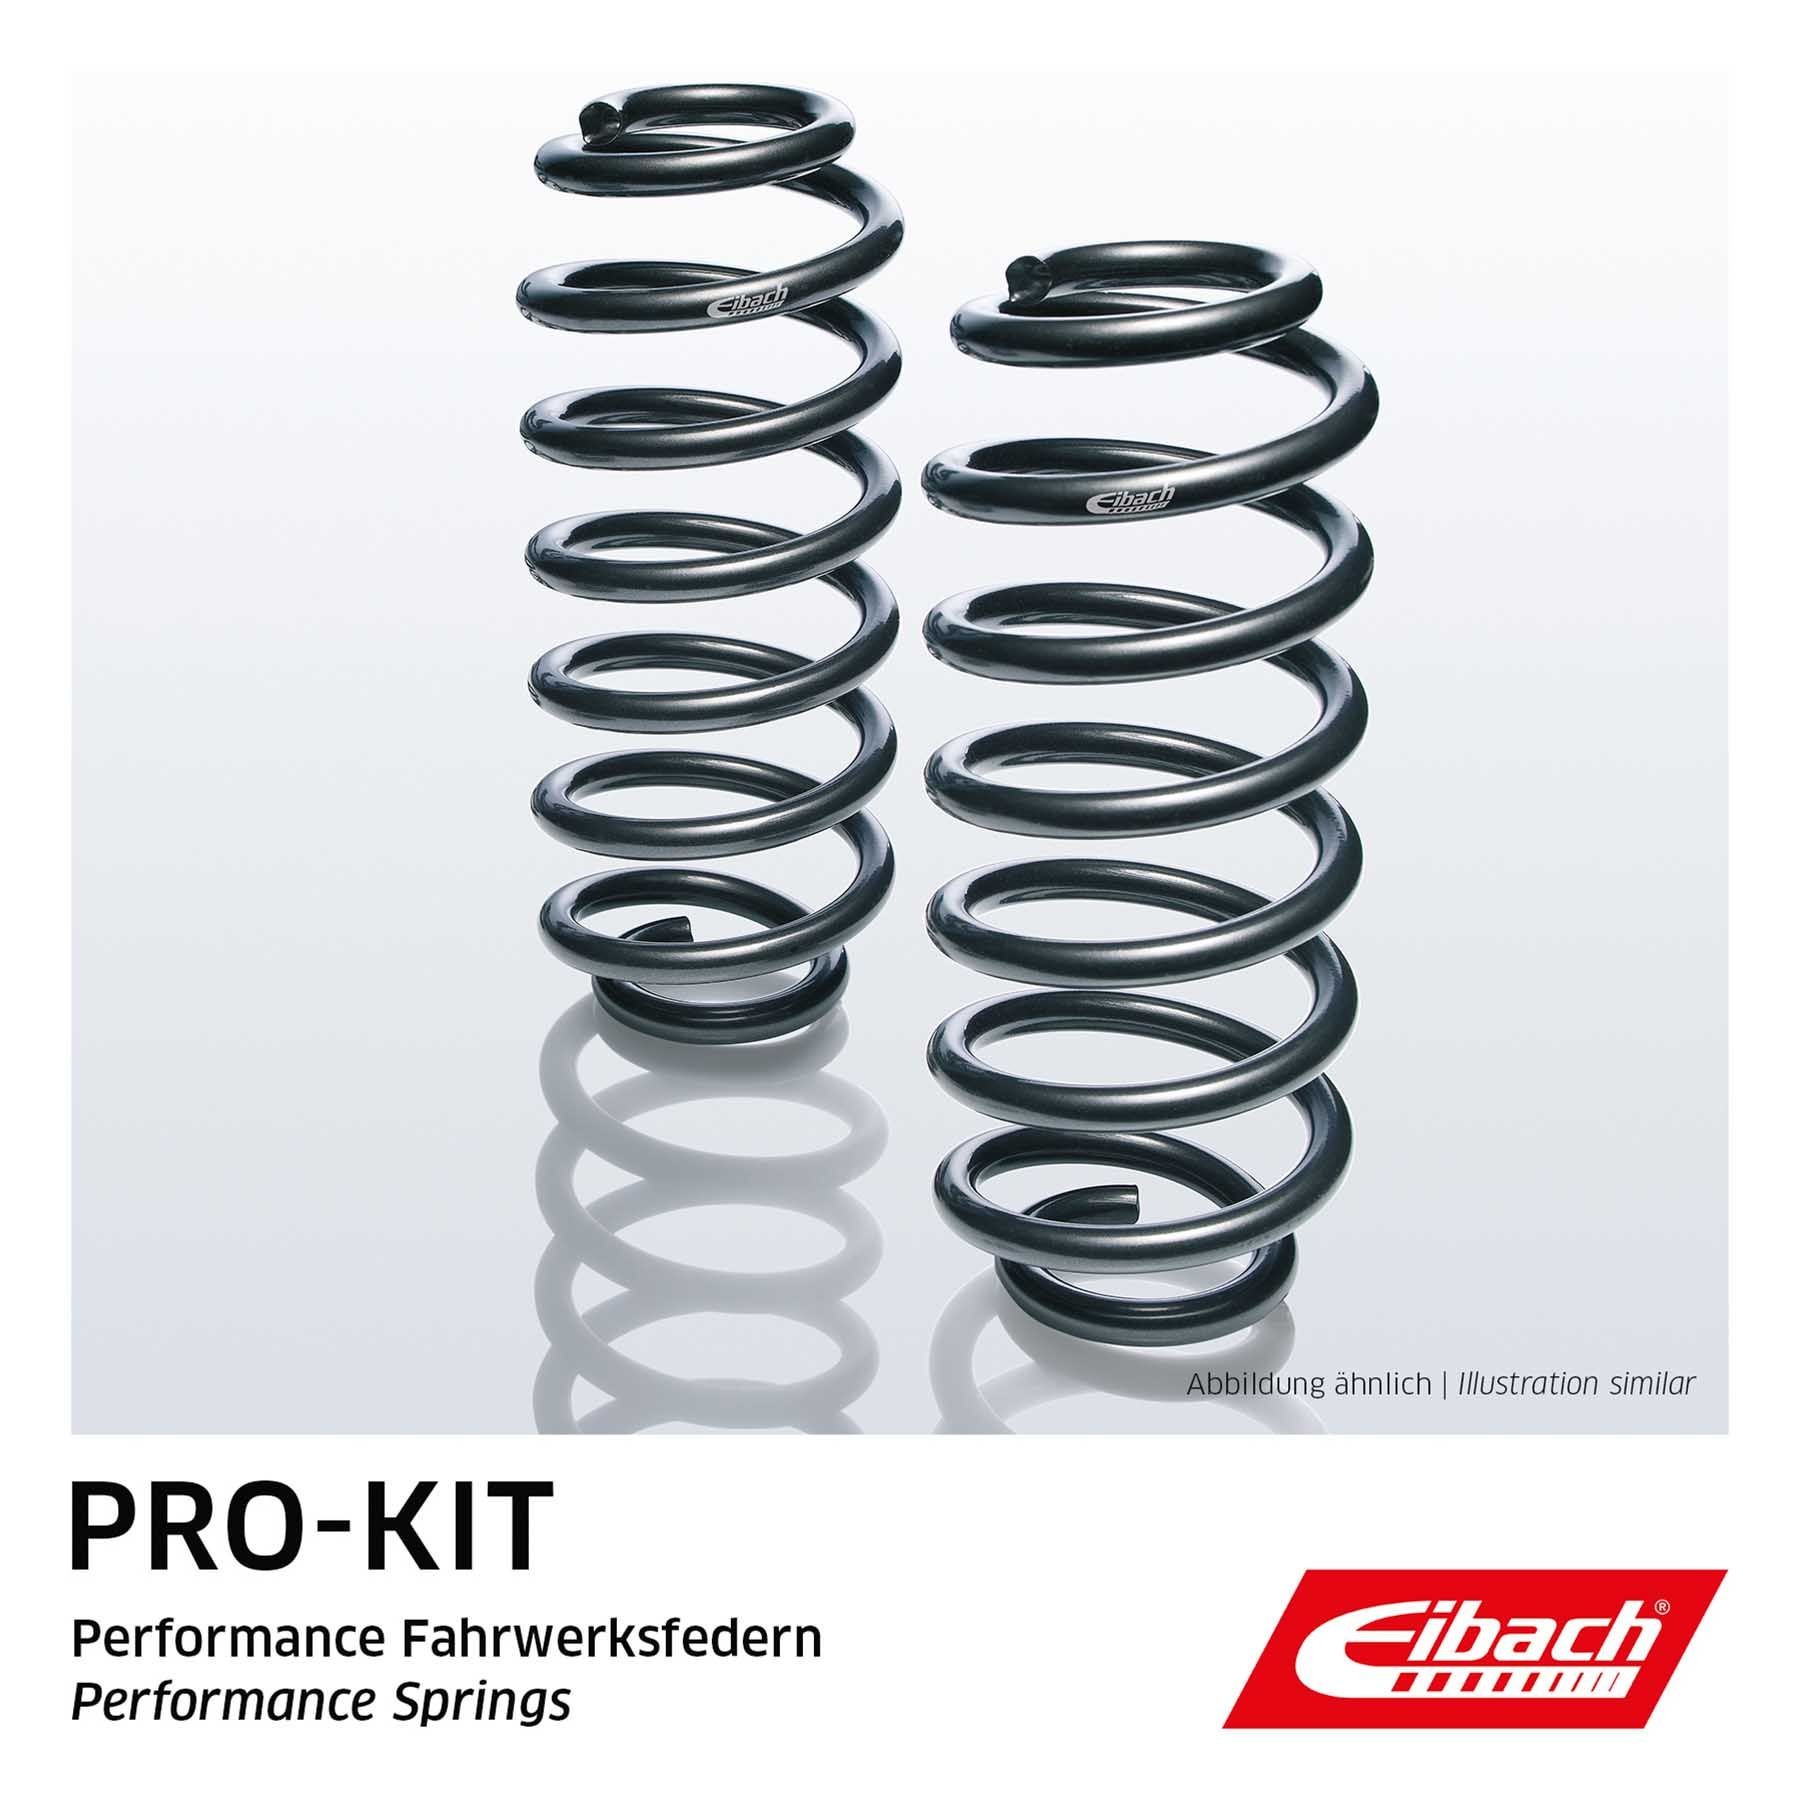 Suspension Kit, coil springs EIBACH E8539-120 - find, compare the prices and save!